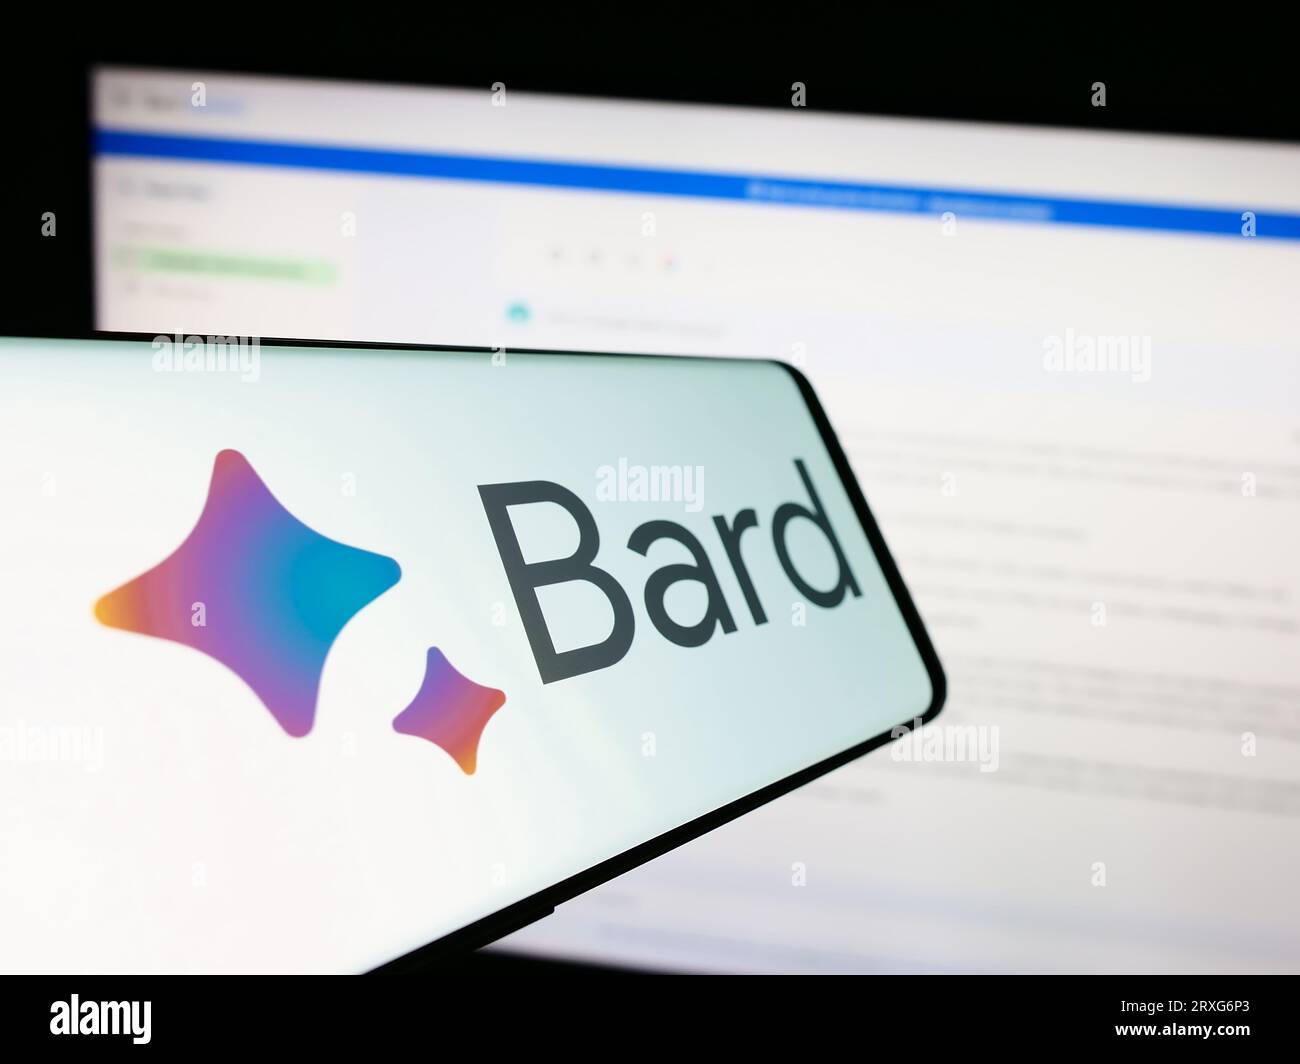 Smartphone with logo of generative AI chatbot Google Bard on screen in front of business website. Focus on center-left of phone display. Stock Photo